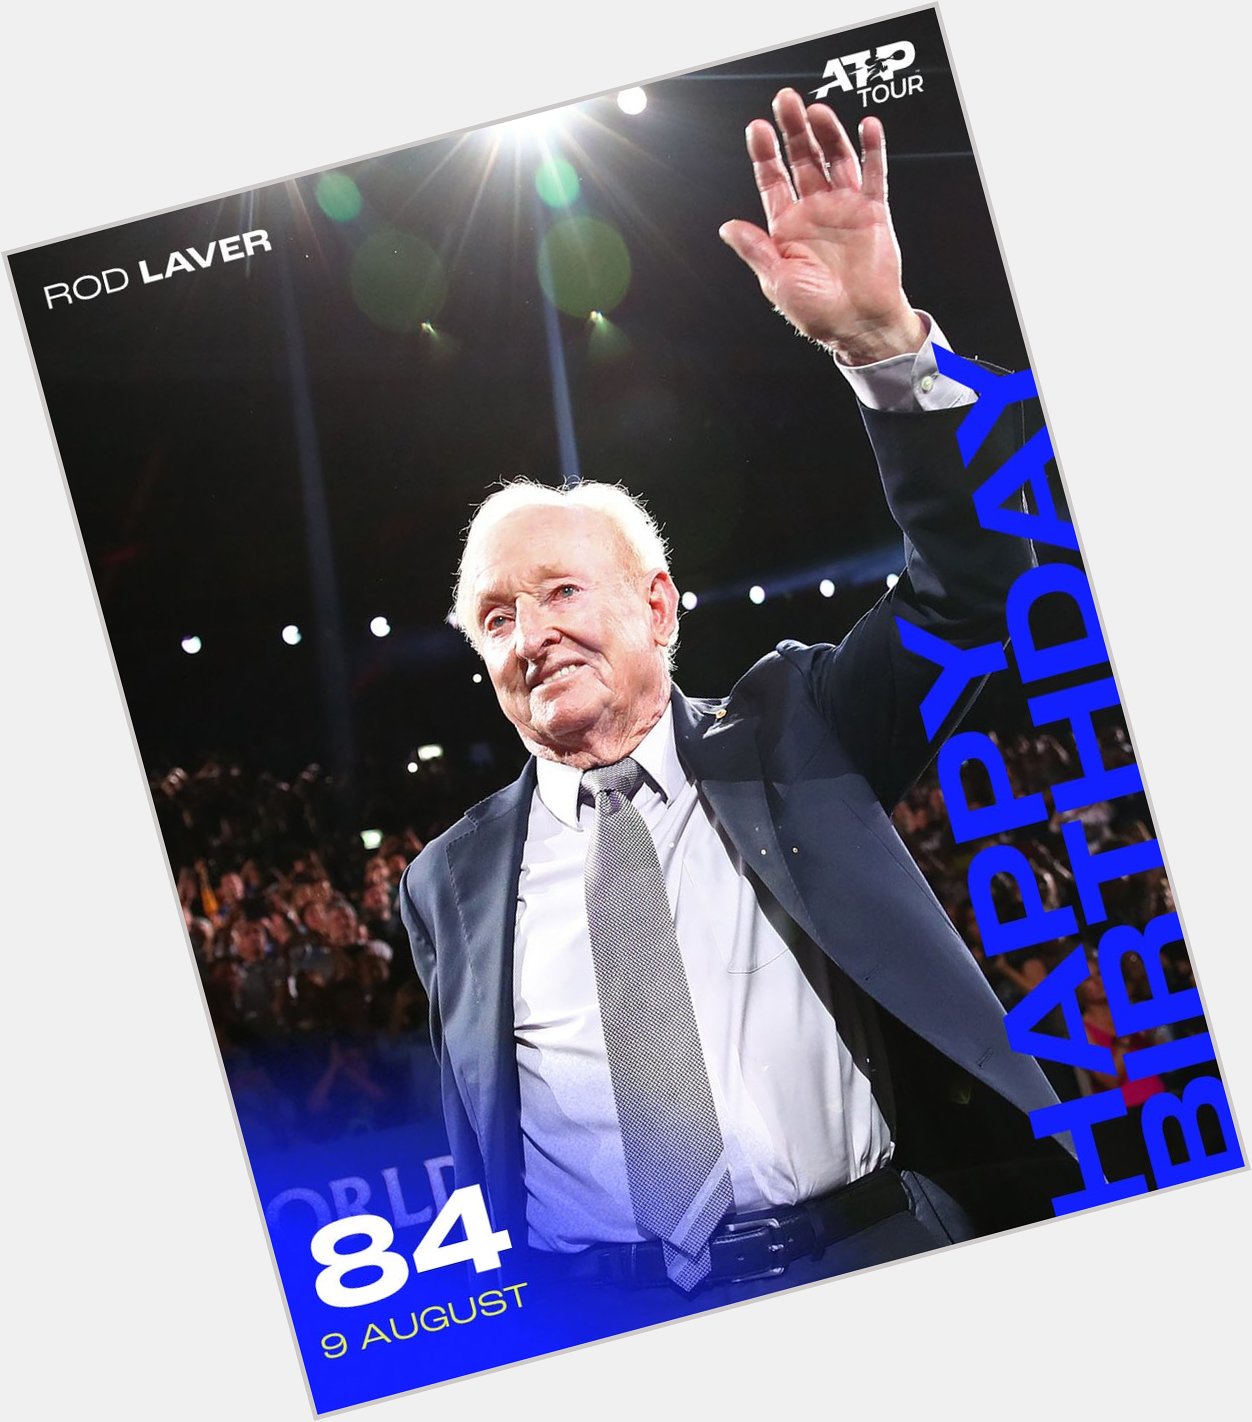 Join us in wishing a happy birthday to a LEGEND of the game! Have an incredible day, Rod Laver 